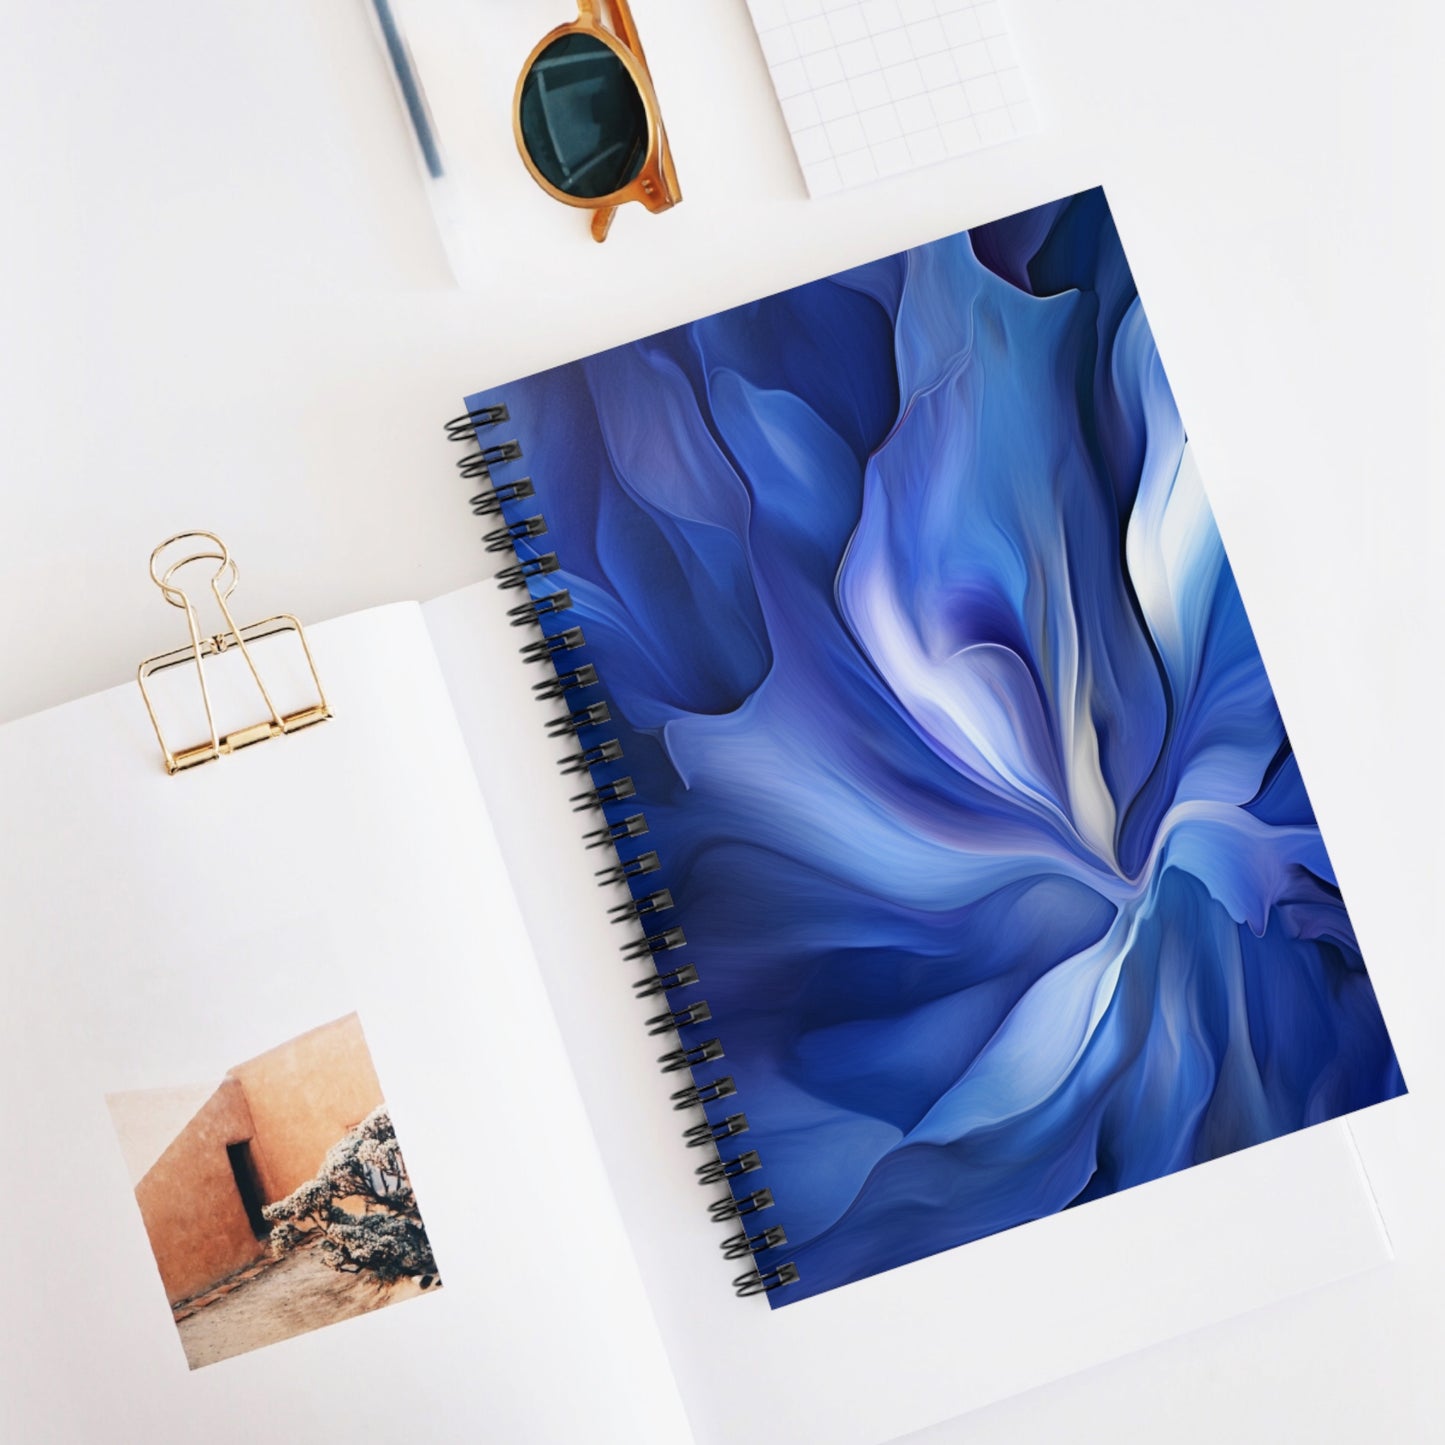 Spiral Notebook - Ruled Line Abstract Blue Tulip 3